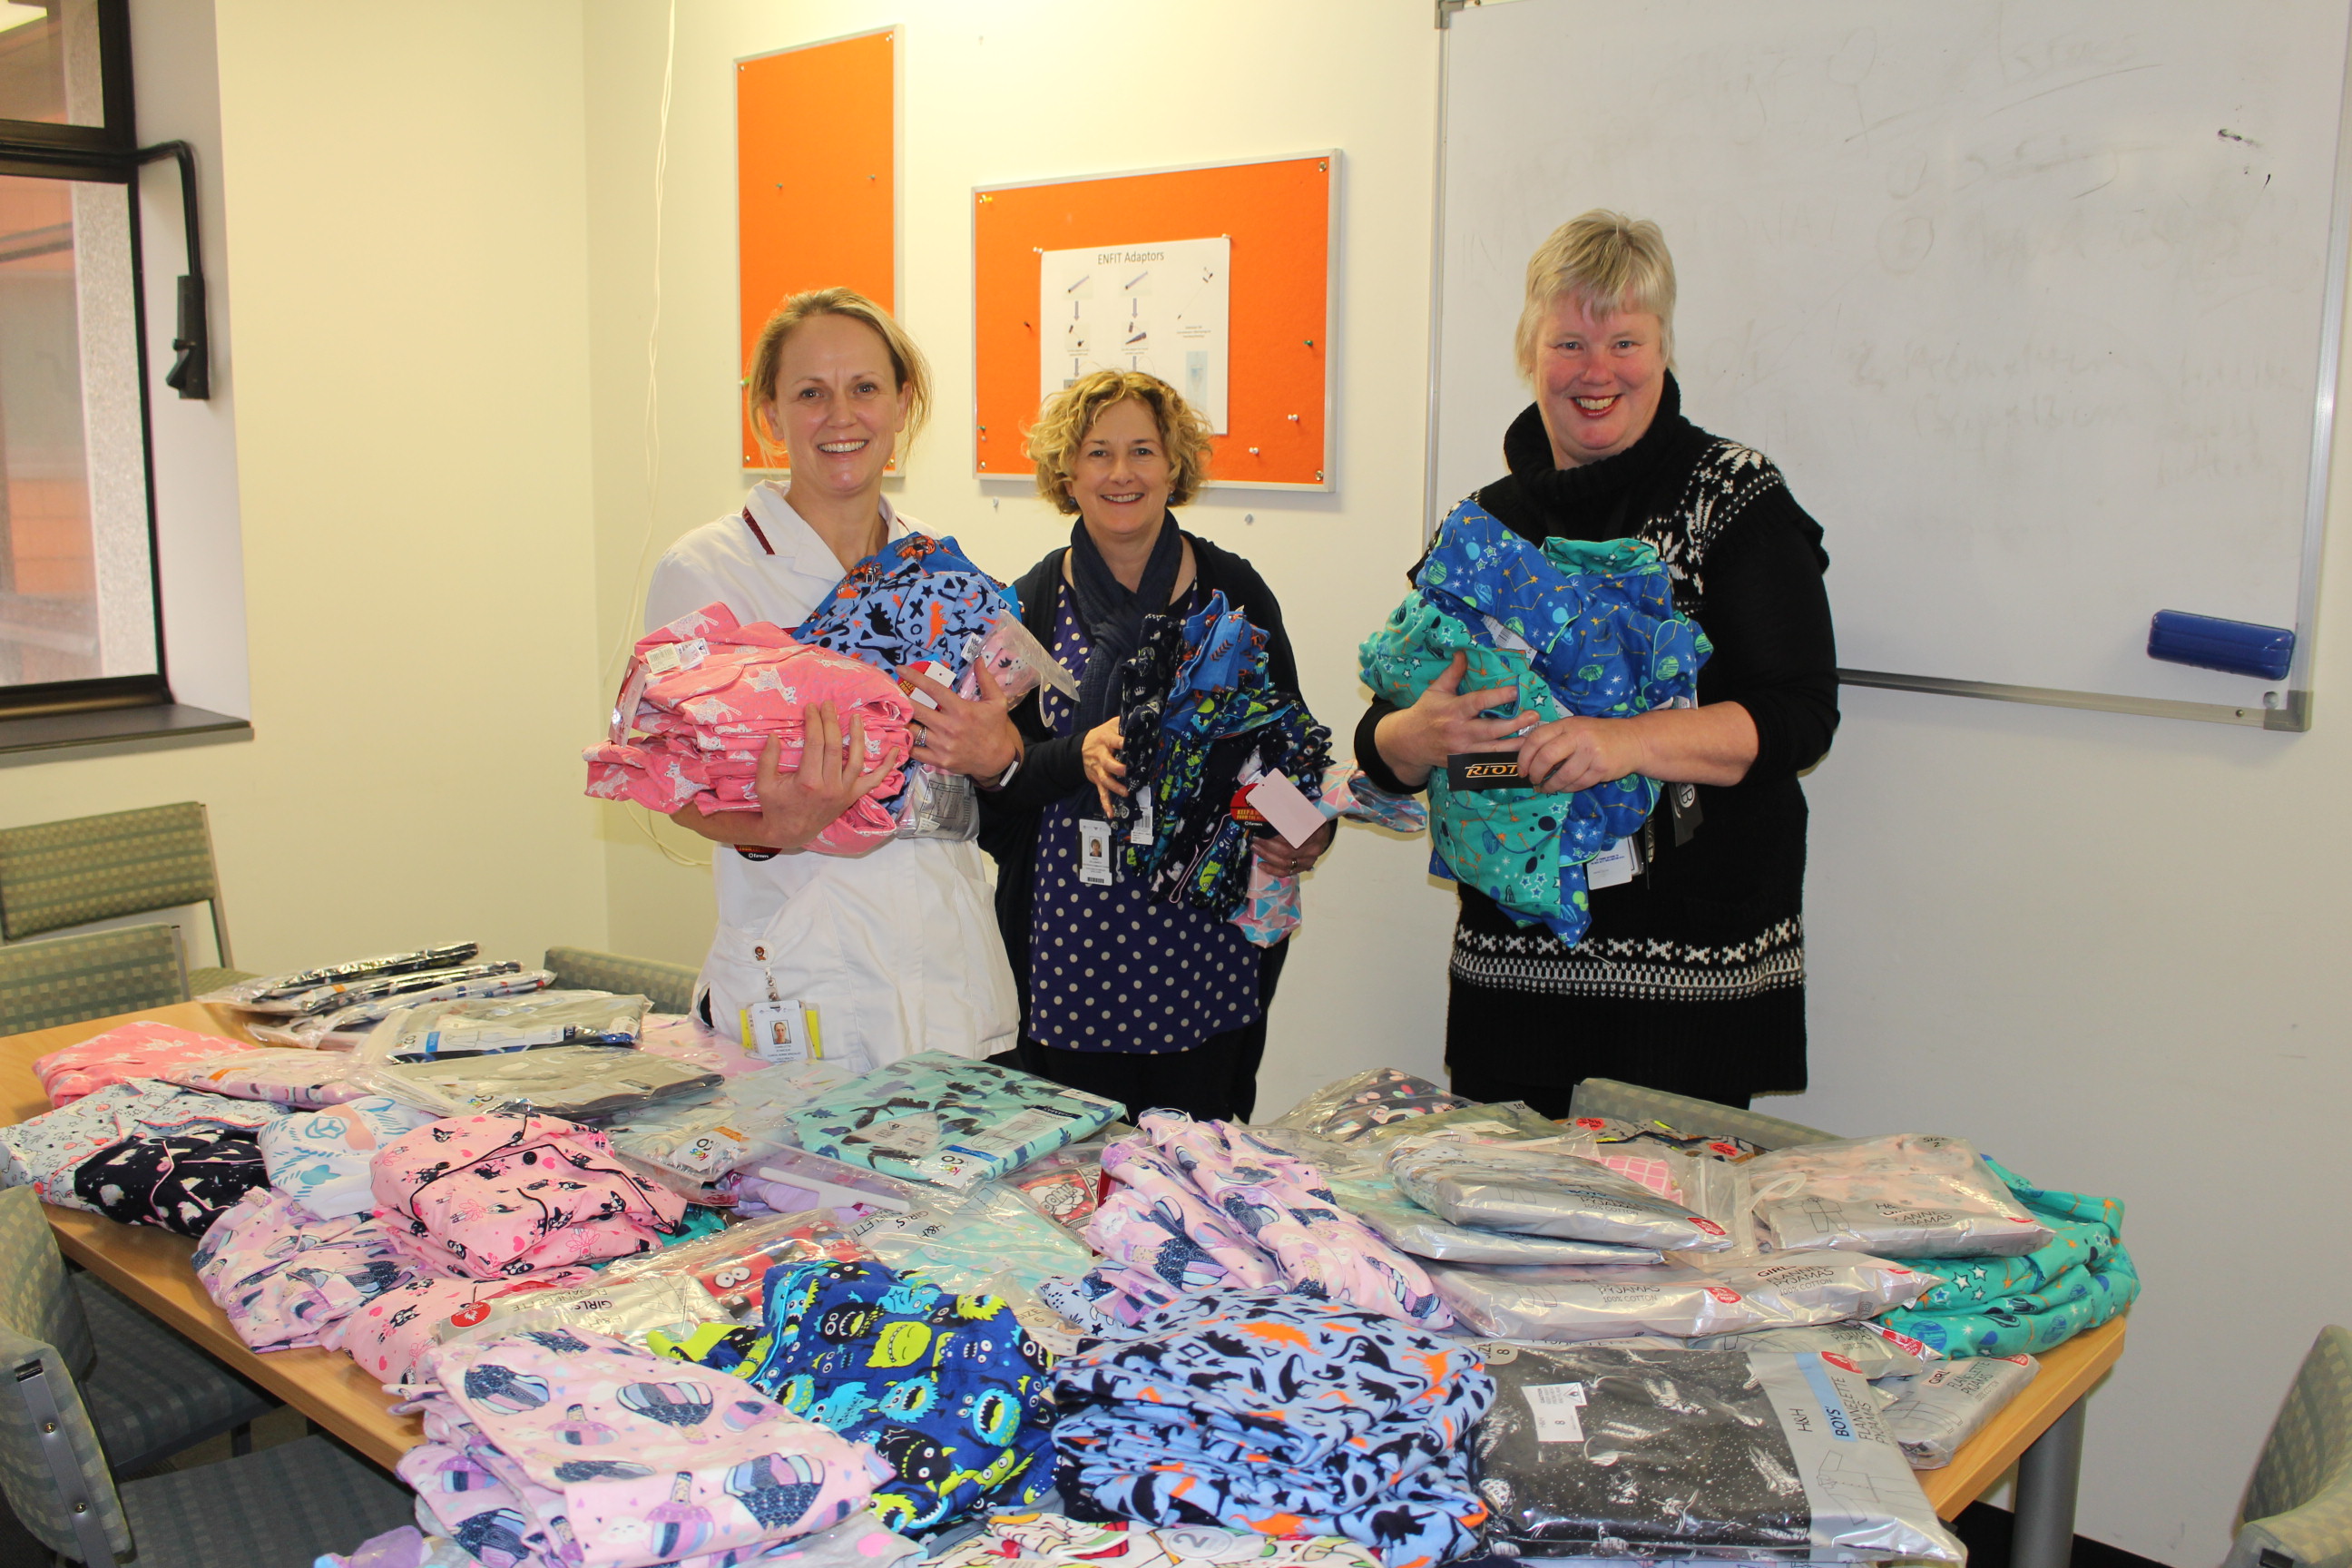 Wellington Regional Children's Hospital Clinical Nurse Specialist Charlotte Stanczuk, with Paediatric Community Nurses Kerry Dellabarca and Helen Orr and some of the pyjamas.